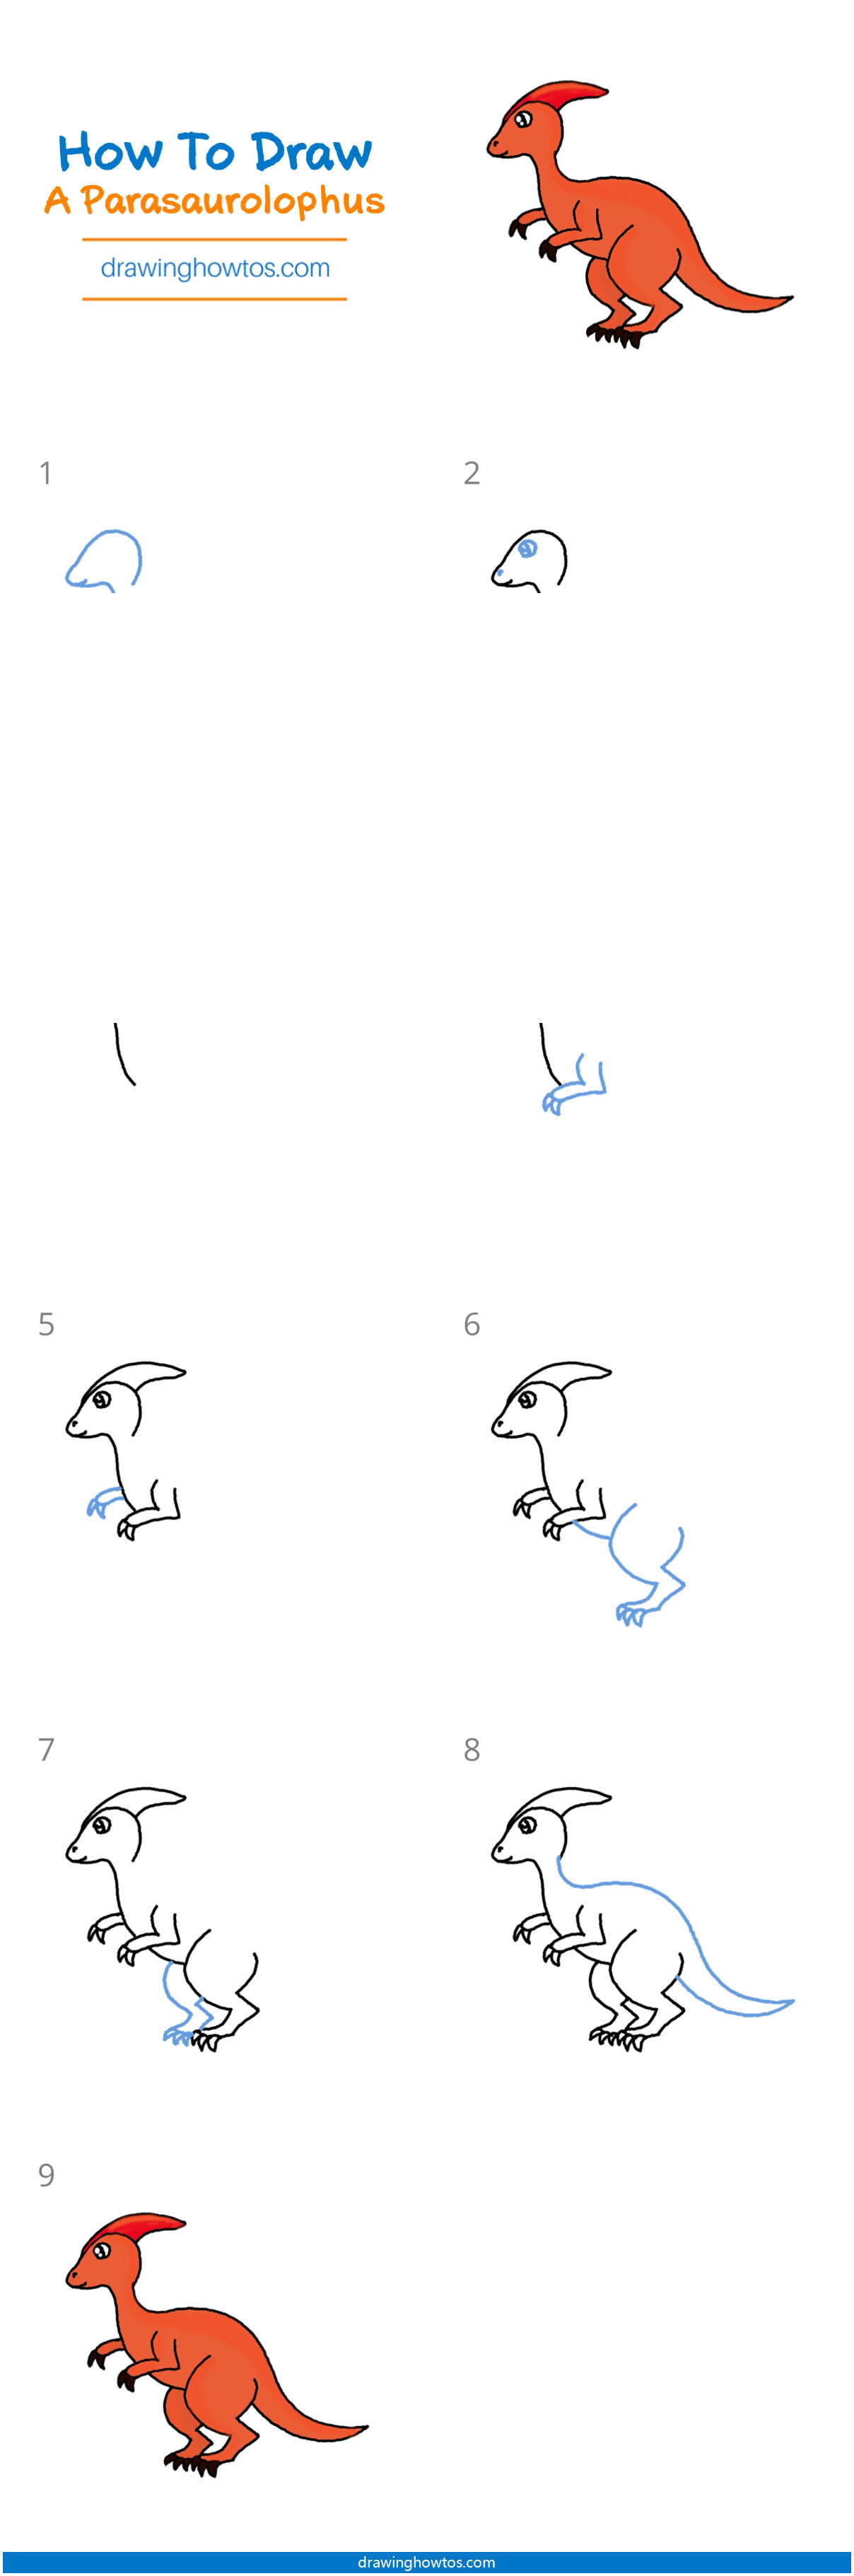 How to Draw a Parasaurolophus Step by Step